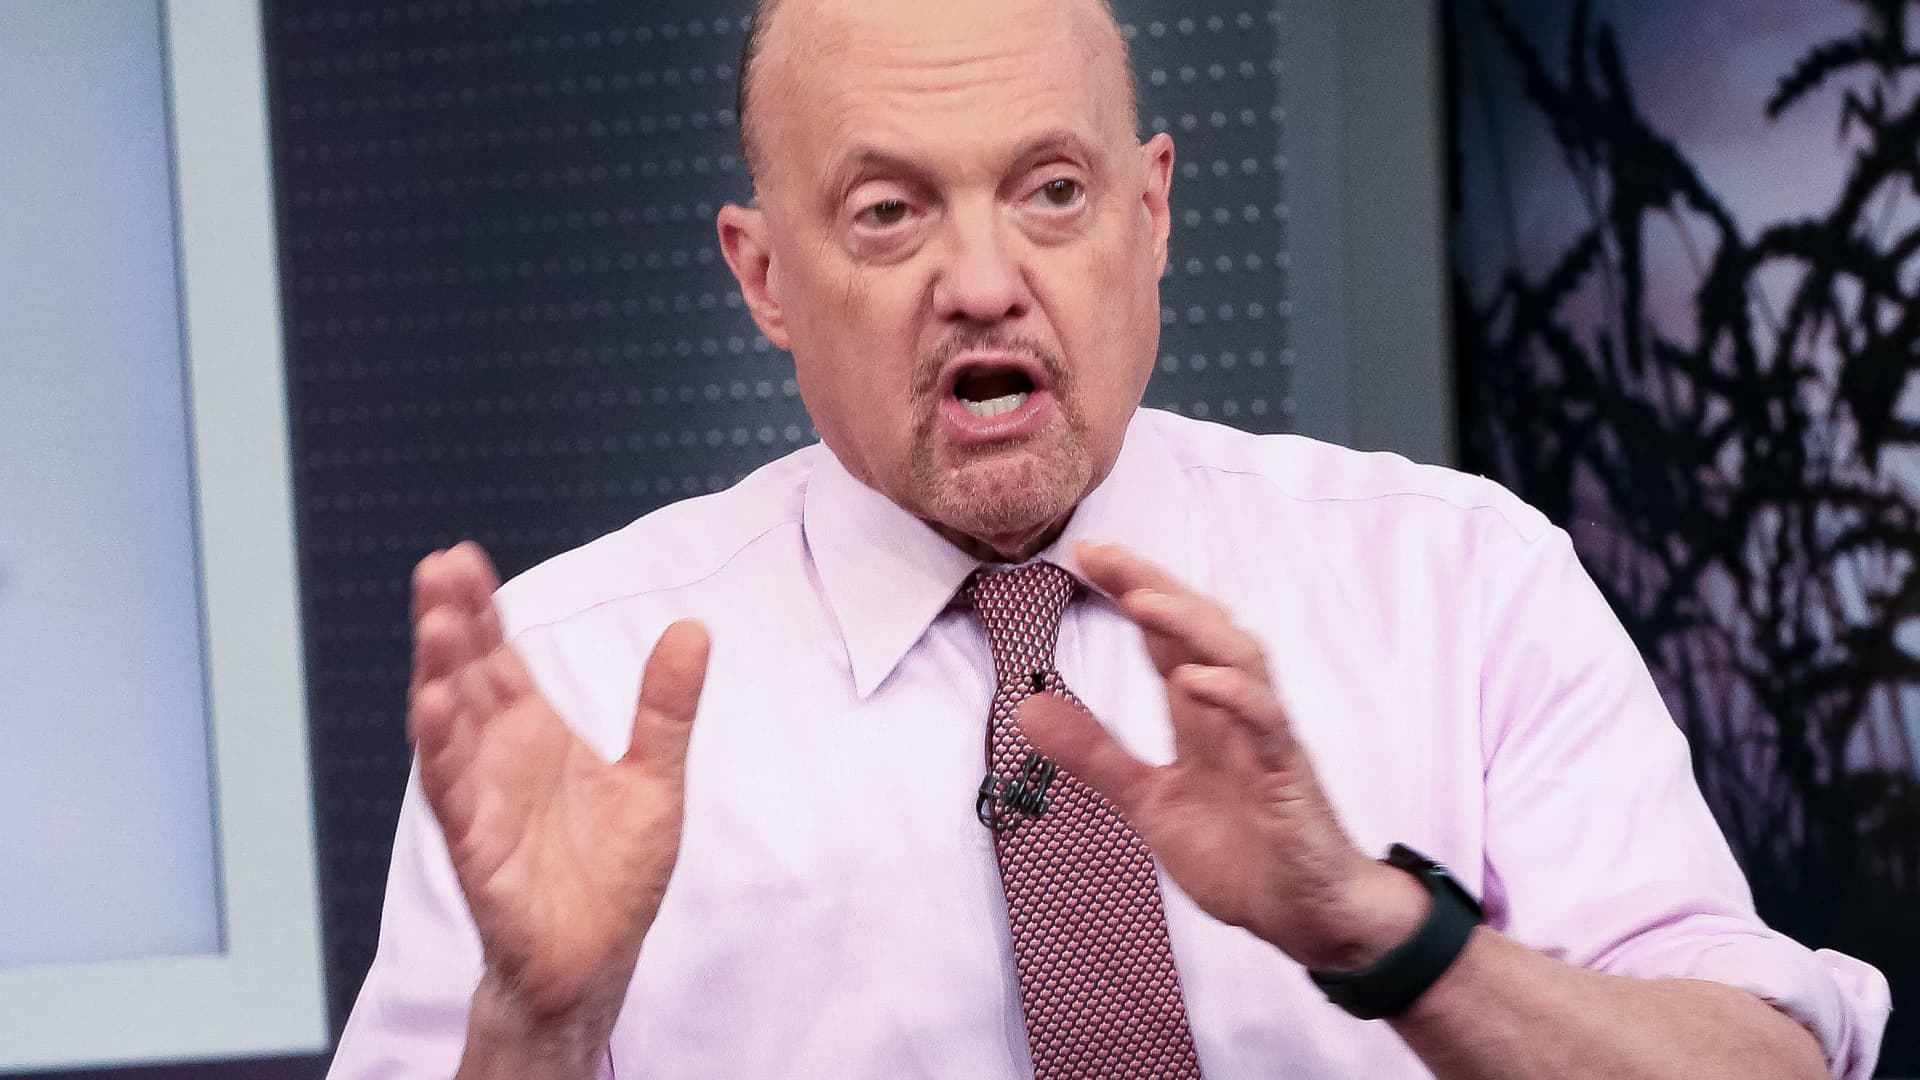 Cramer's week ahead: There could be 'real signs' for the Fed to slow down